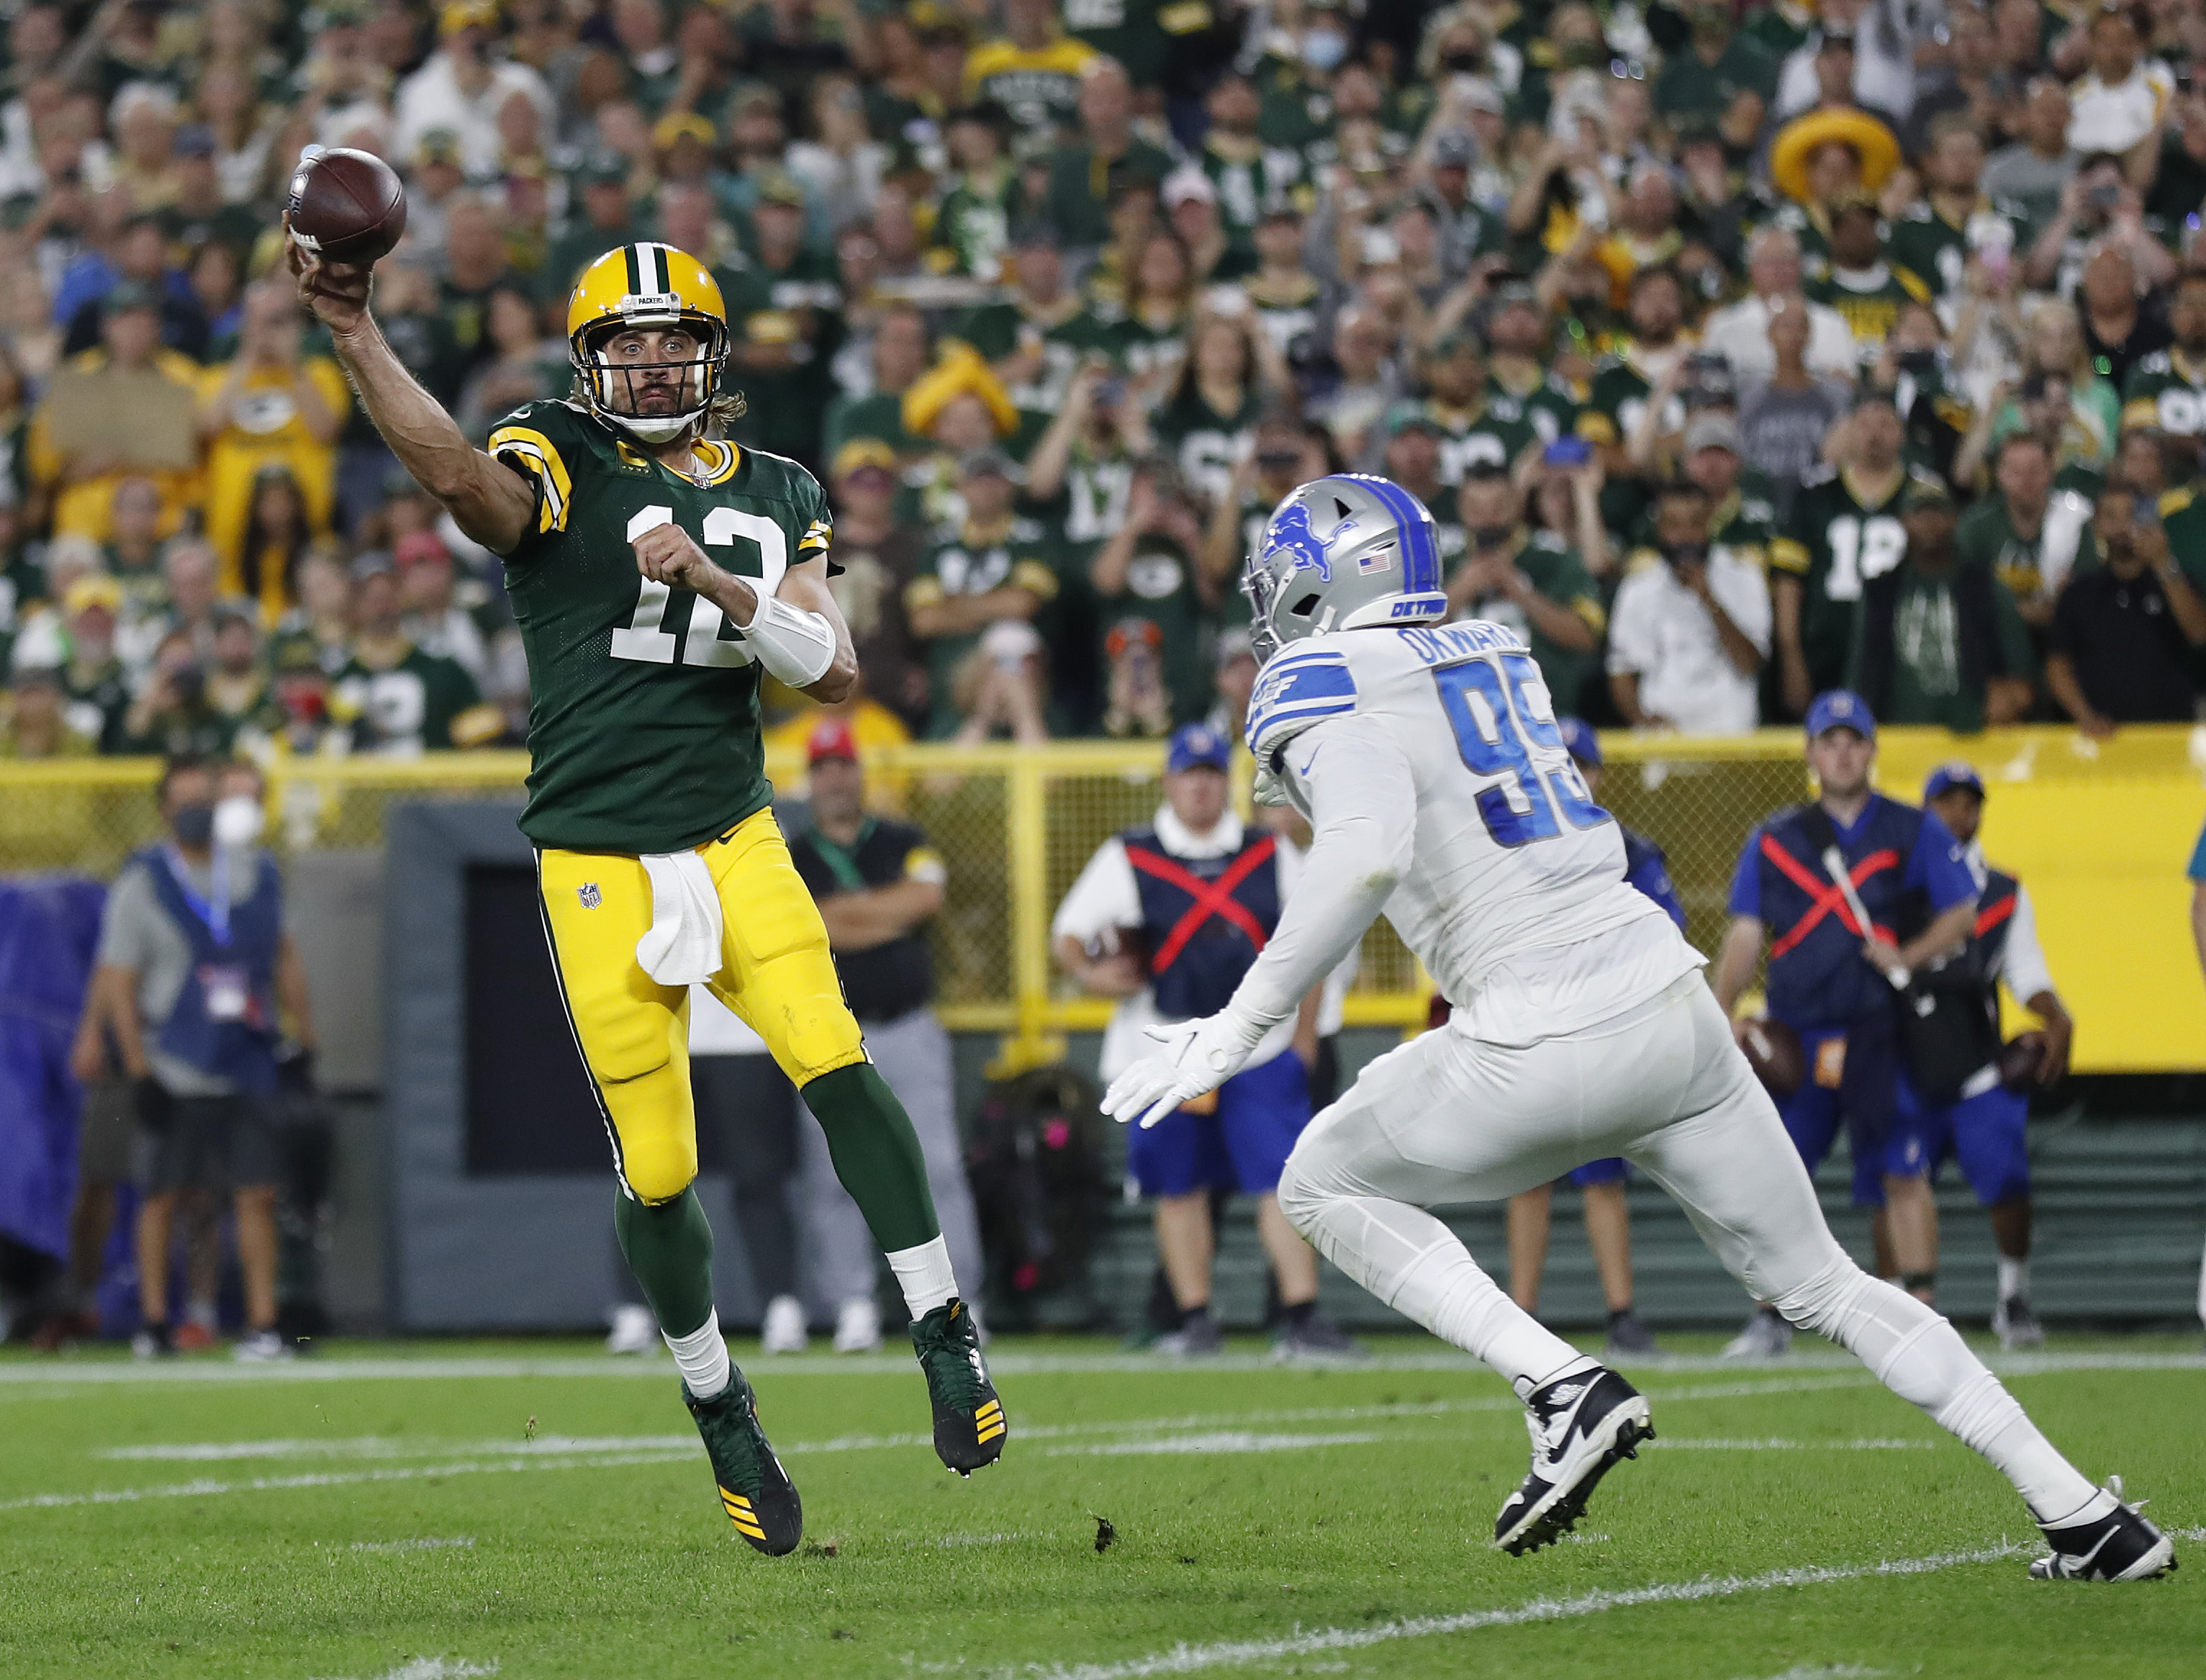 Packers-Lions game set for Sunday night at Lambeau Field